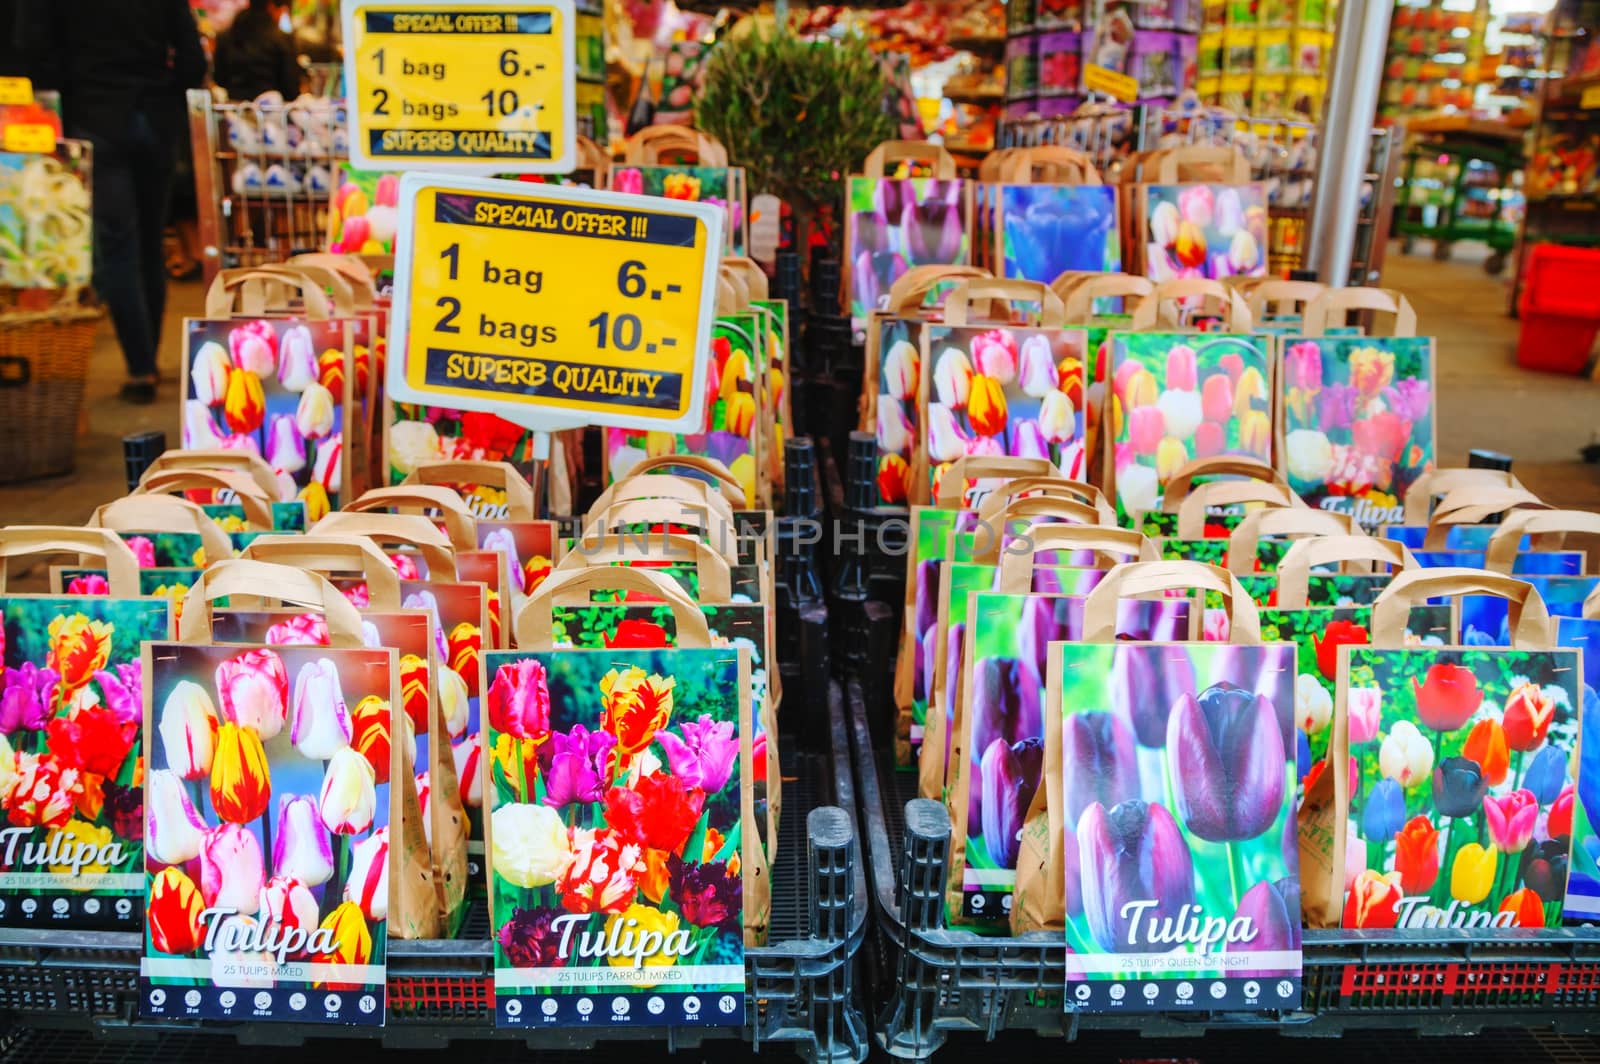 Boxes with bulbs at the Floating flower market in Amsterdam by AndreyKr